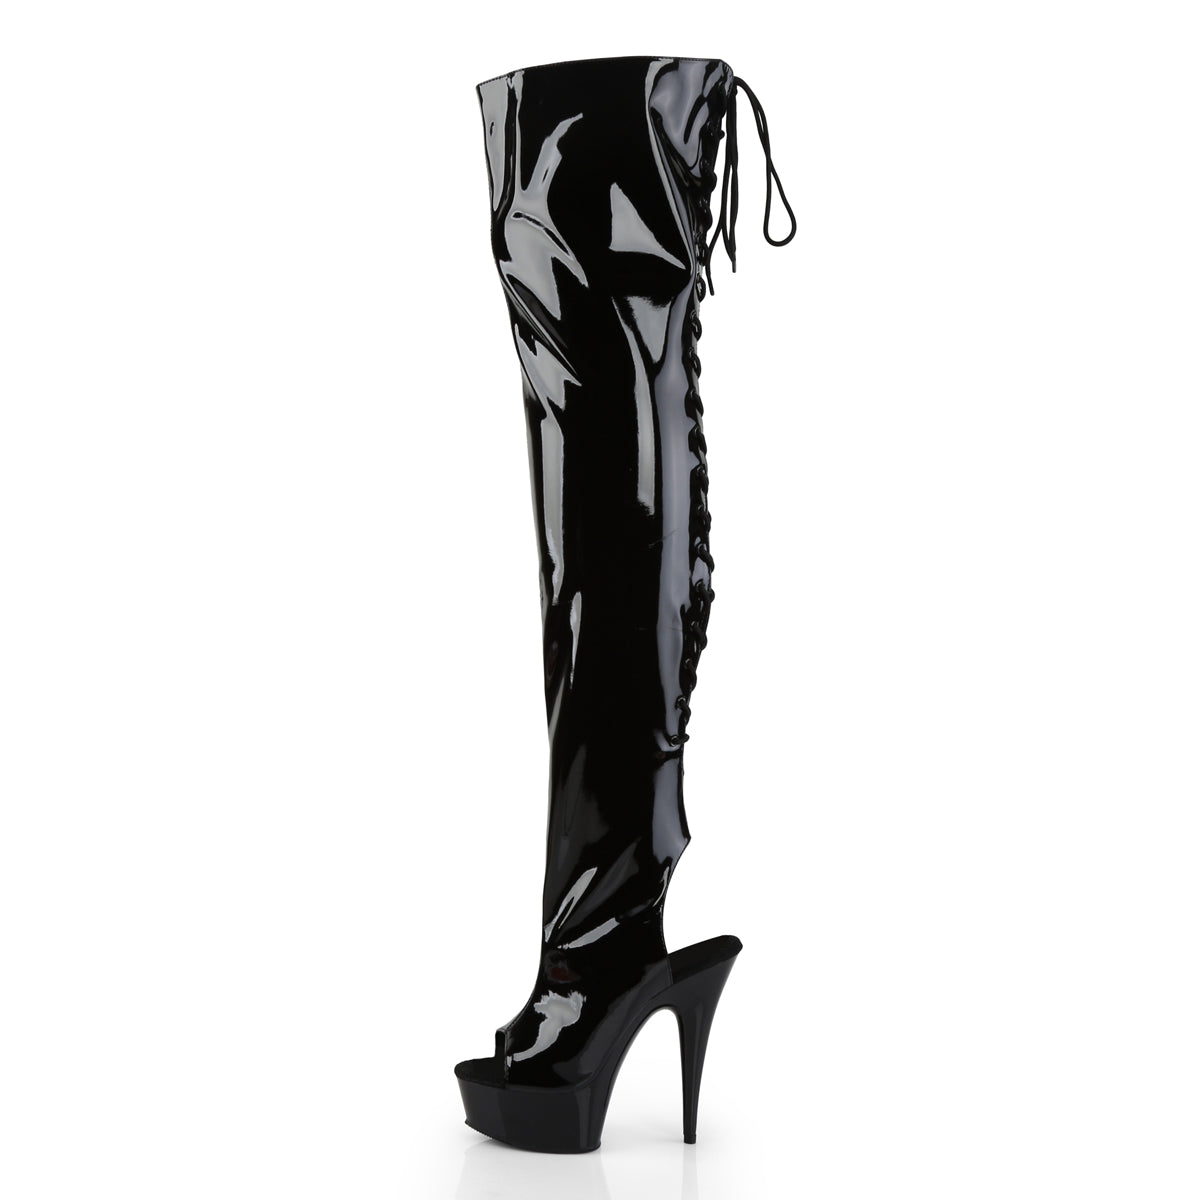 DELIGHT-3017 Black Thigh High Boots  Multi view 4